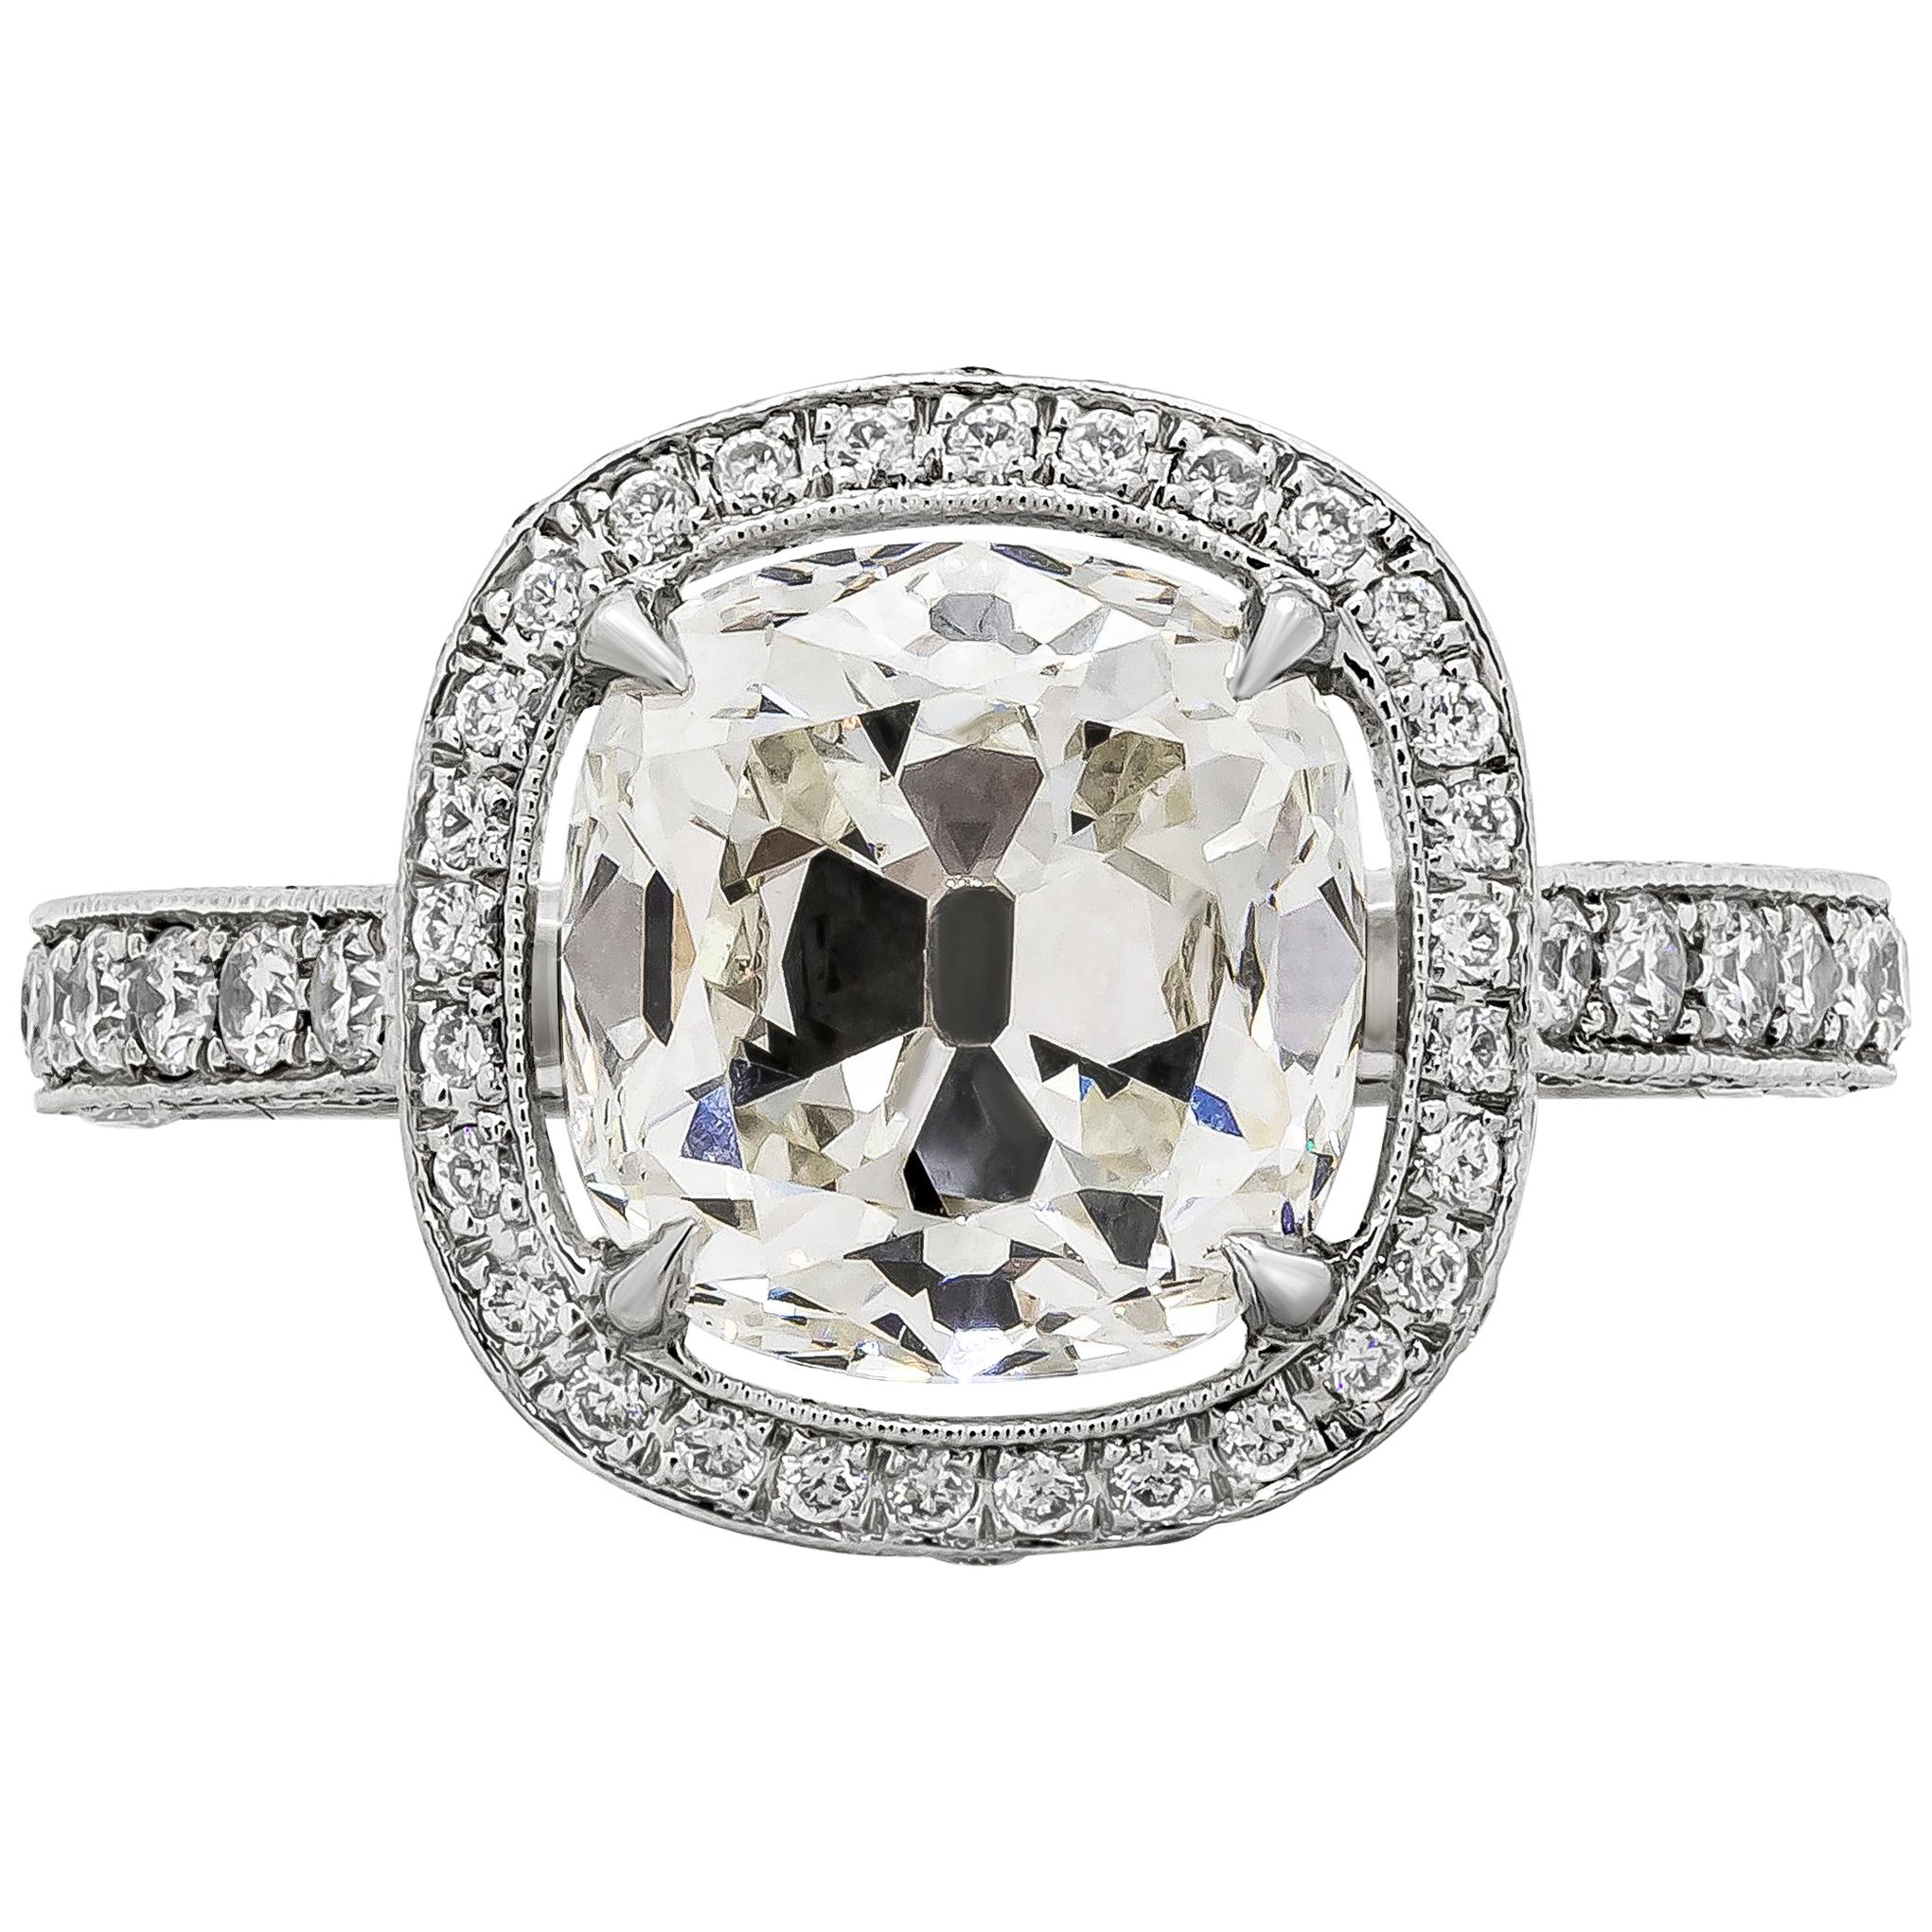 GIA Certified 3.02 Carats Total Antique Cushion Cut Diamond Halo Engagement Ring